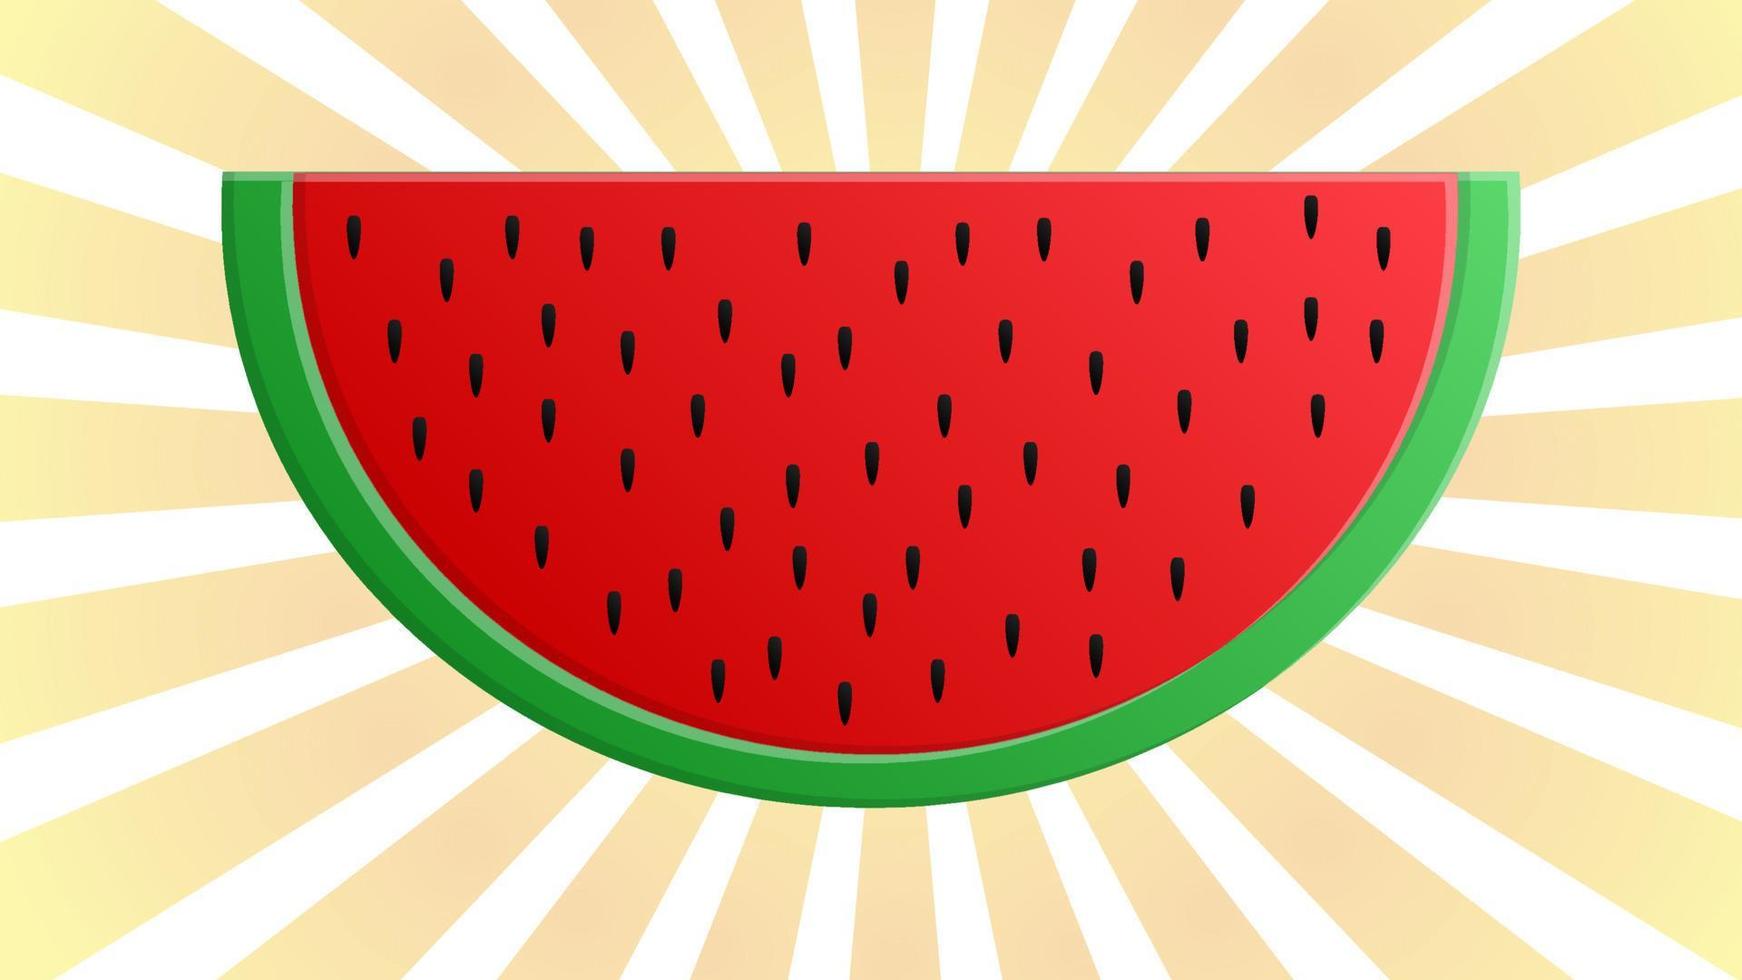 Watermelon slice on a background of rays from the center. Vector illustration